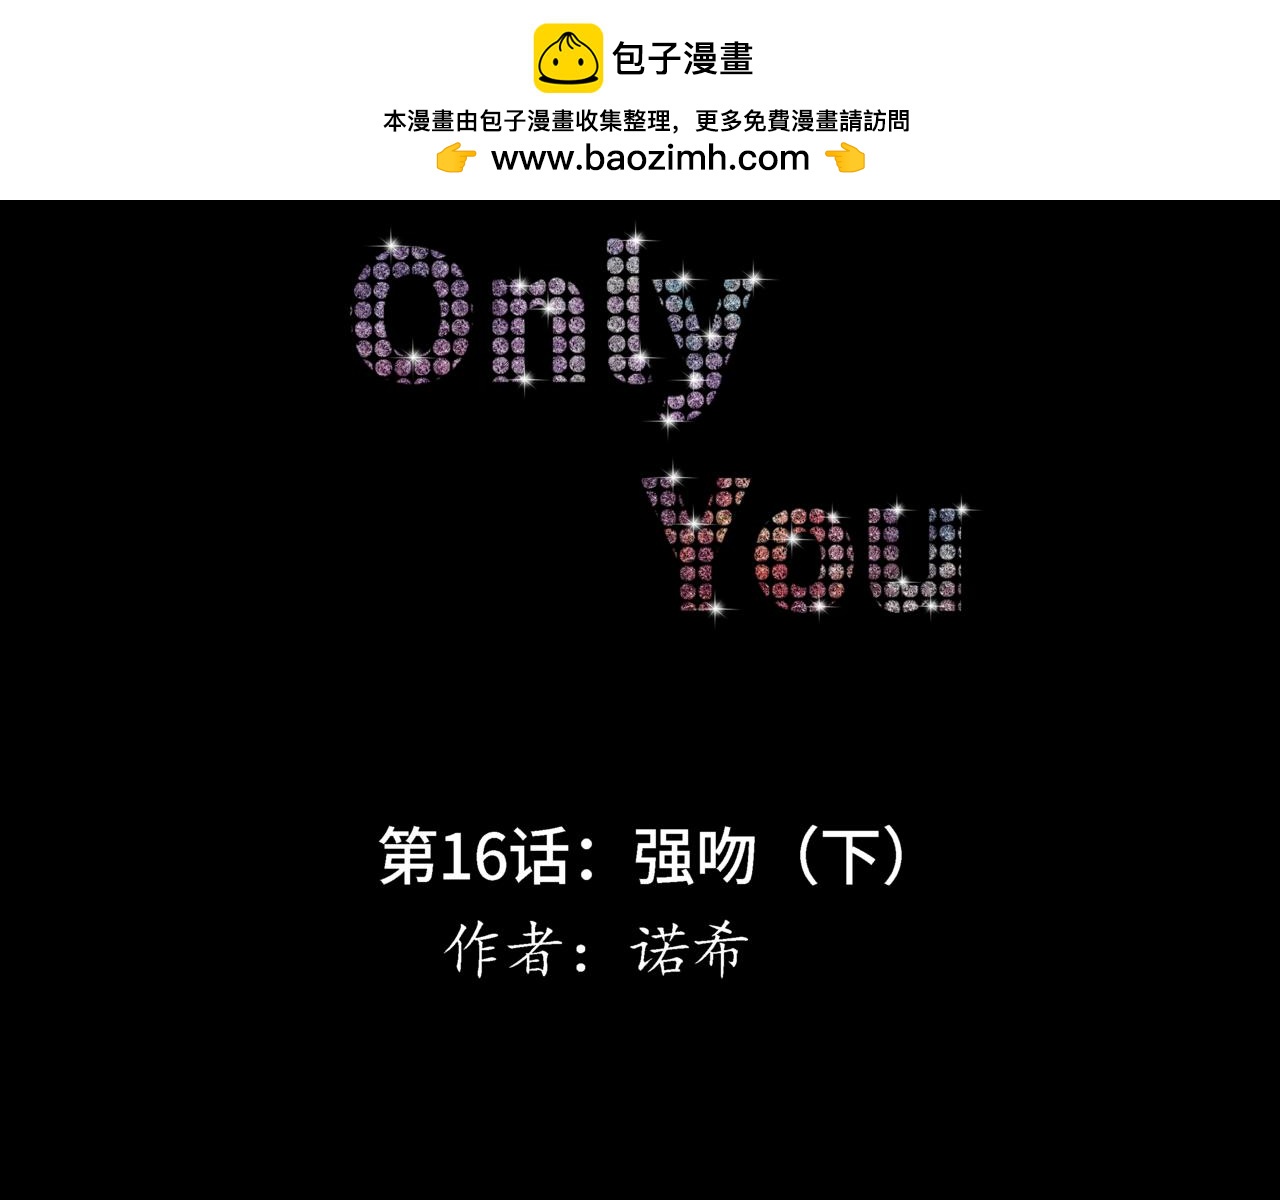 Only You - 第16話：強吻（下）(1/2) - 2